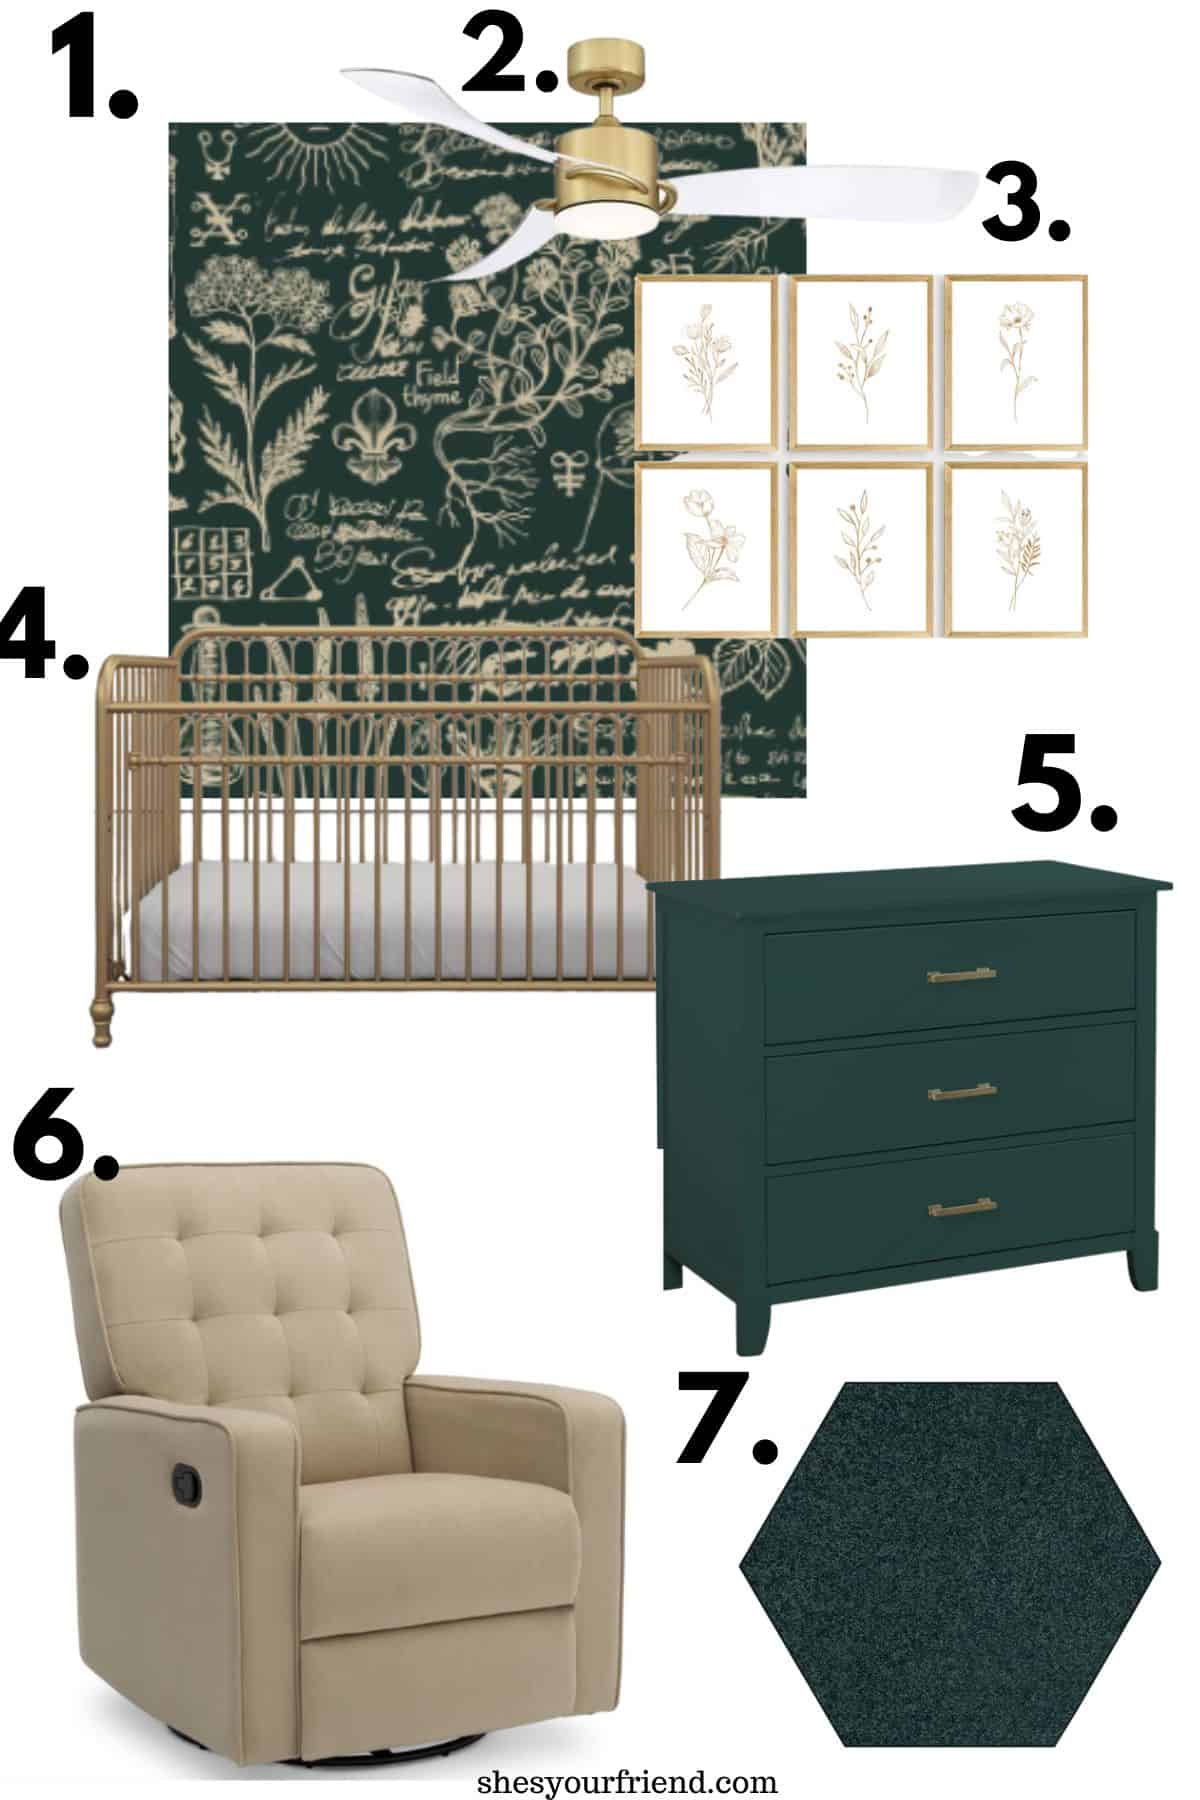 green and gold wall paper ceiling fan light wall art crib dresser glider and rug for a nursery.